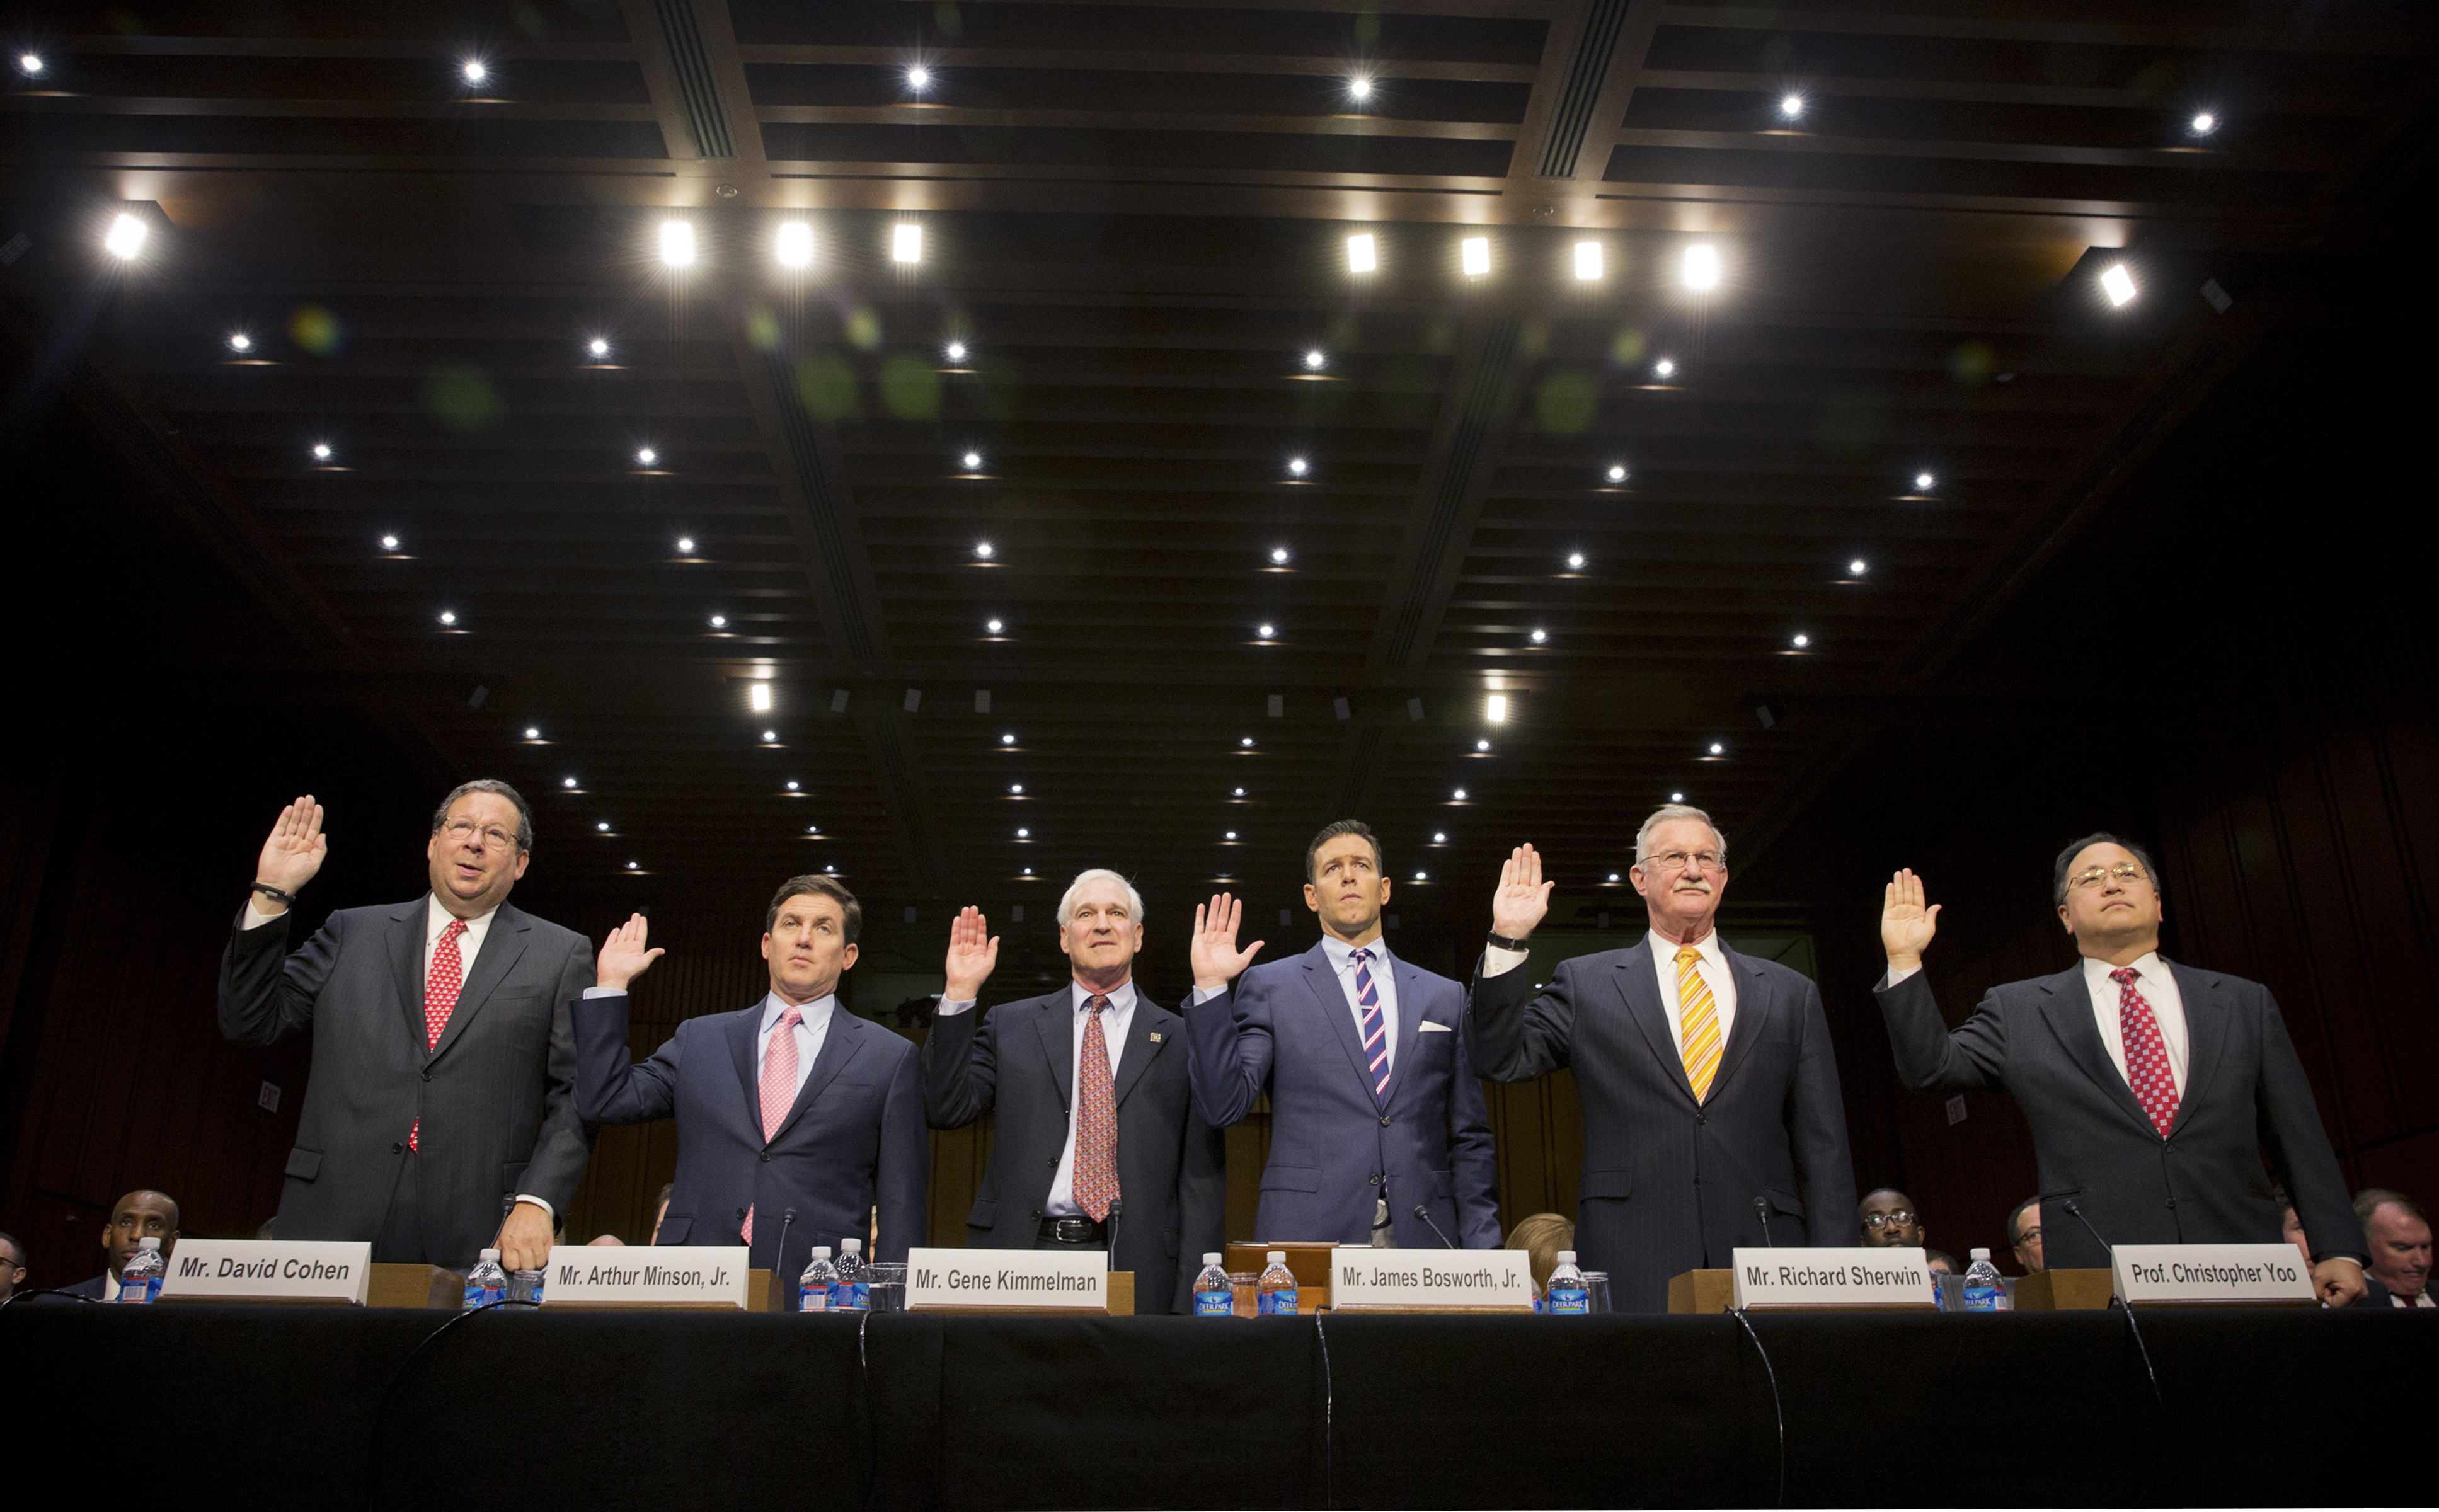 Cable company executives and others who will testify are sworn in at a Senate Judiciary Committee hearing to examine Comcast's proposed takeover of Time Warner Cable in Washington on April 9, 2014. (Stephen Crowley—The New York Times/Redux)